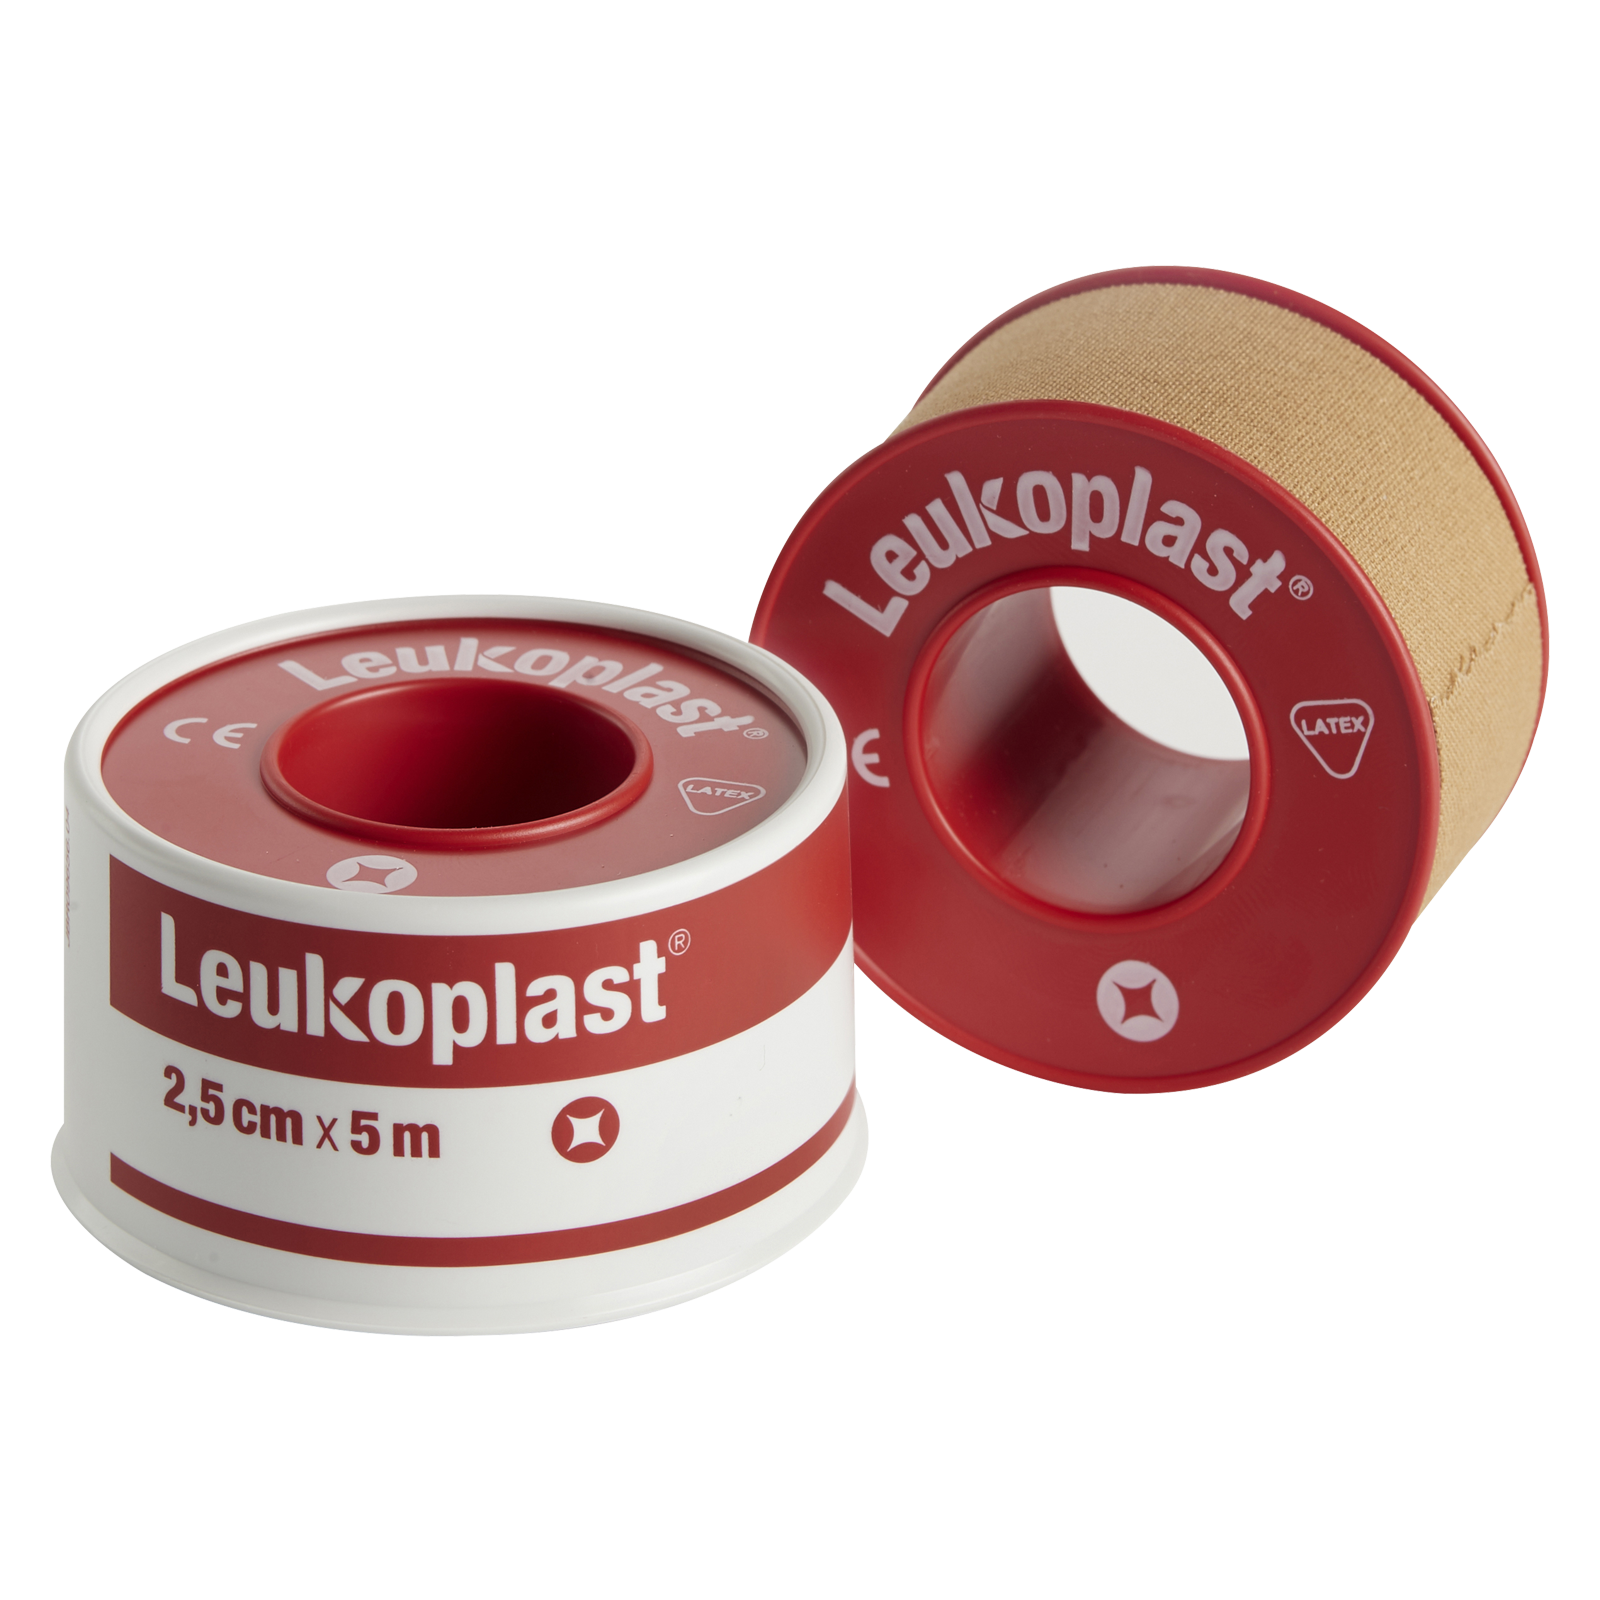 Certificaat spannend Knop Leukoplast® 5,0 m x 2,50 cm - GEHWOL: Foot care products for foot  enthusiasts